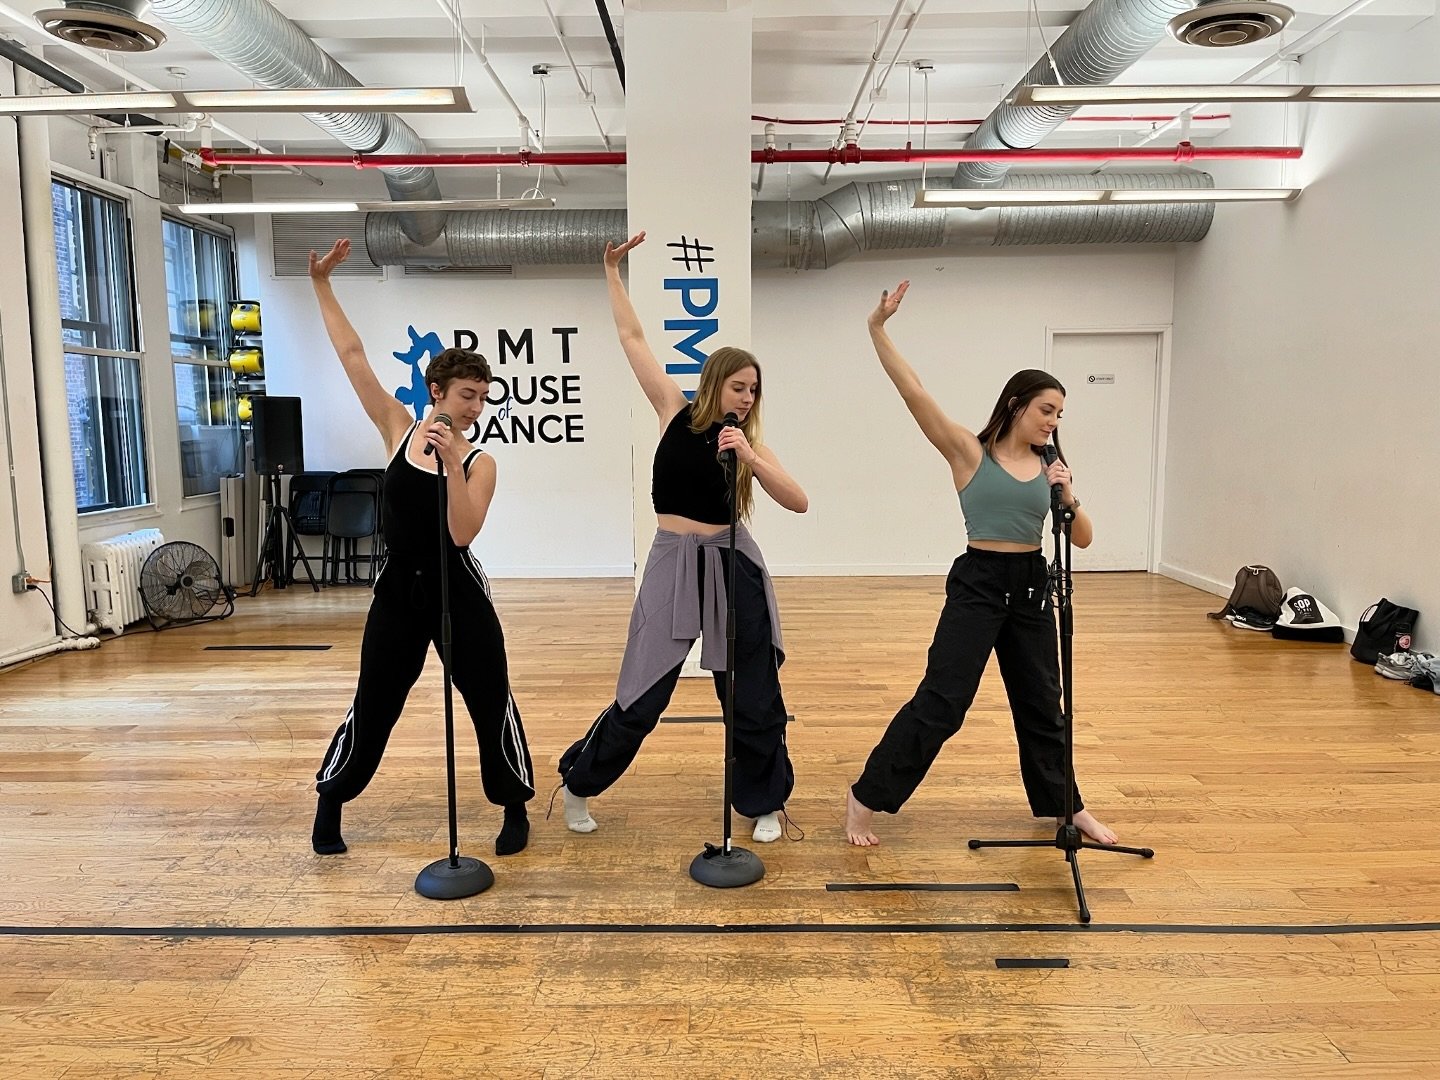 Guess what we&rsquo;ve been working on in rehearsal? 🎶

The premiere of PMT Dance Company&rsquo;s full length show- Dissonance is coming July 14th 4 and 7pm at KnJ Theater @peridancecenter - Link in Bio for ticket info!

#pmtdancecompany #rehearsal 